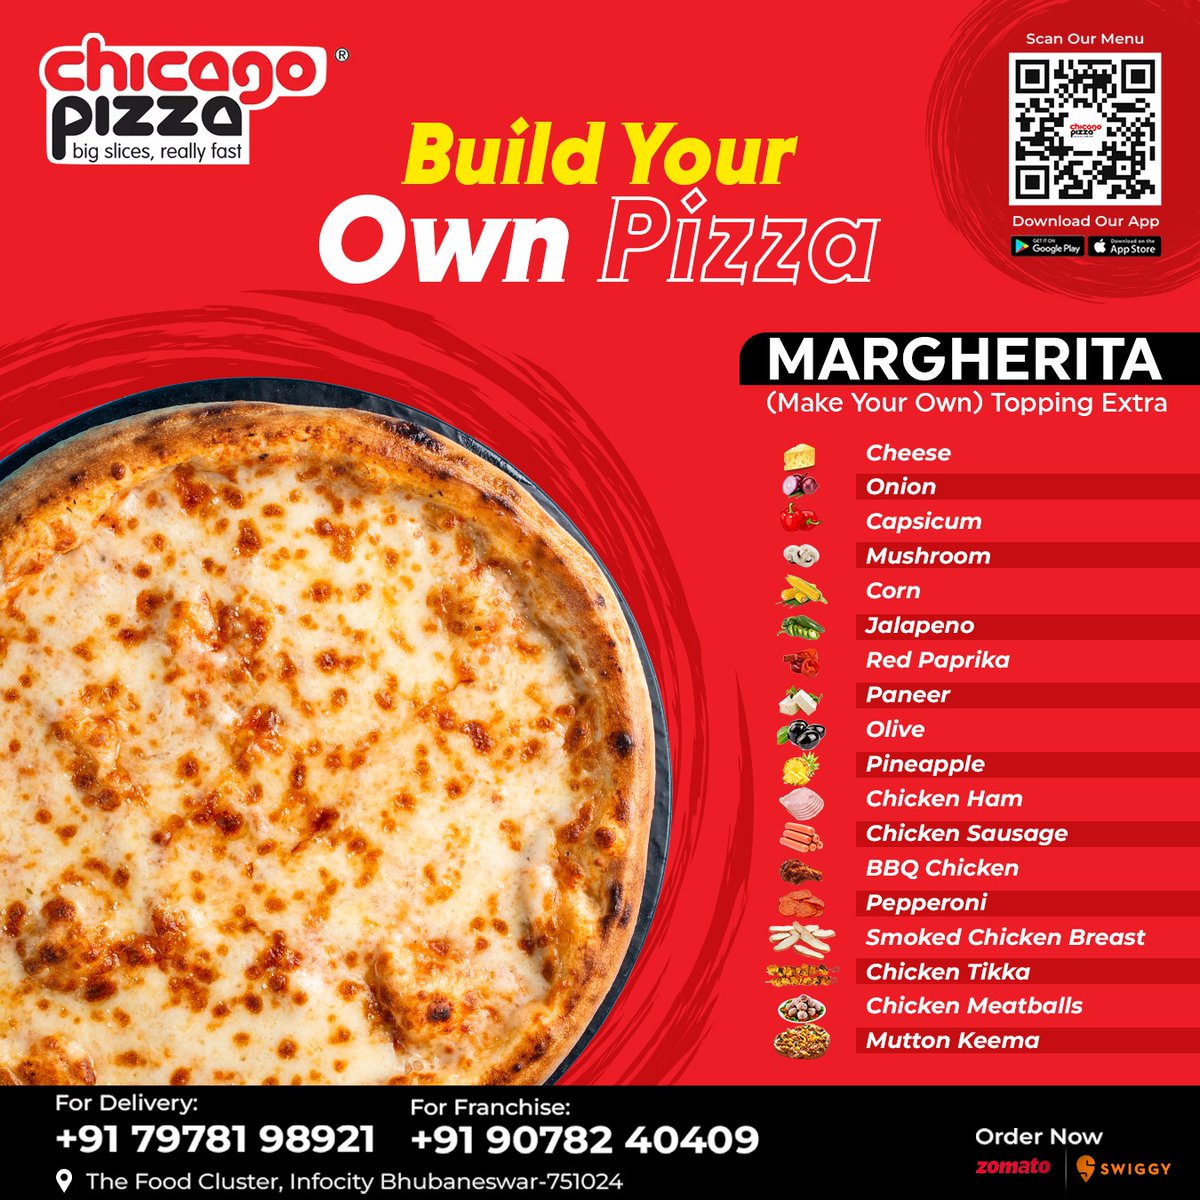 Come experience the difference and make your pizza your own.

#PizzaLovers #MargheritaPizza #BuildYourOwnPizza #PizzaParty #PizzaCreation #ToppingsGalore #PizzaPerfection #PizzaChoices #CustomPizza #DIYPizza